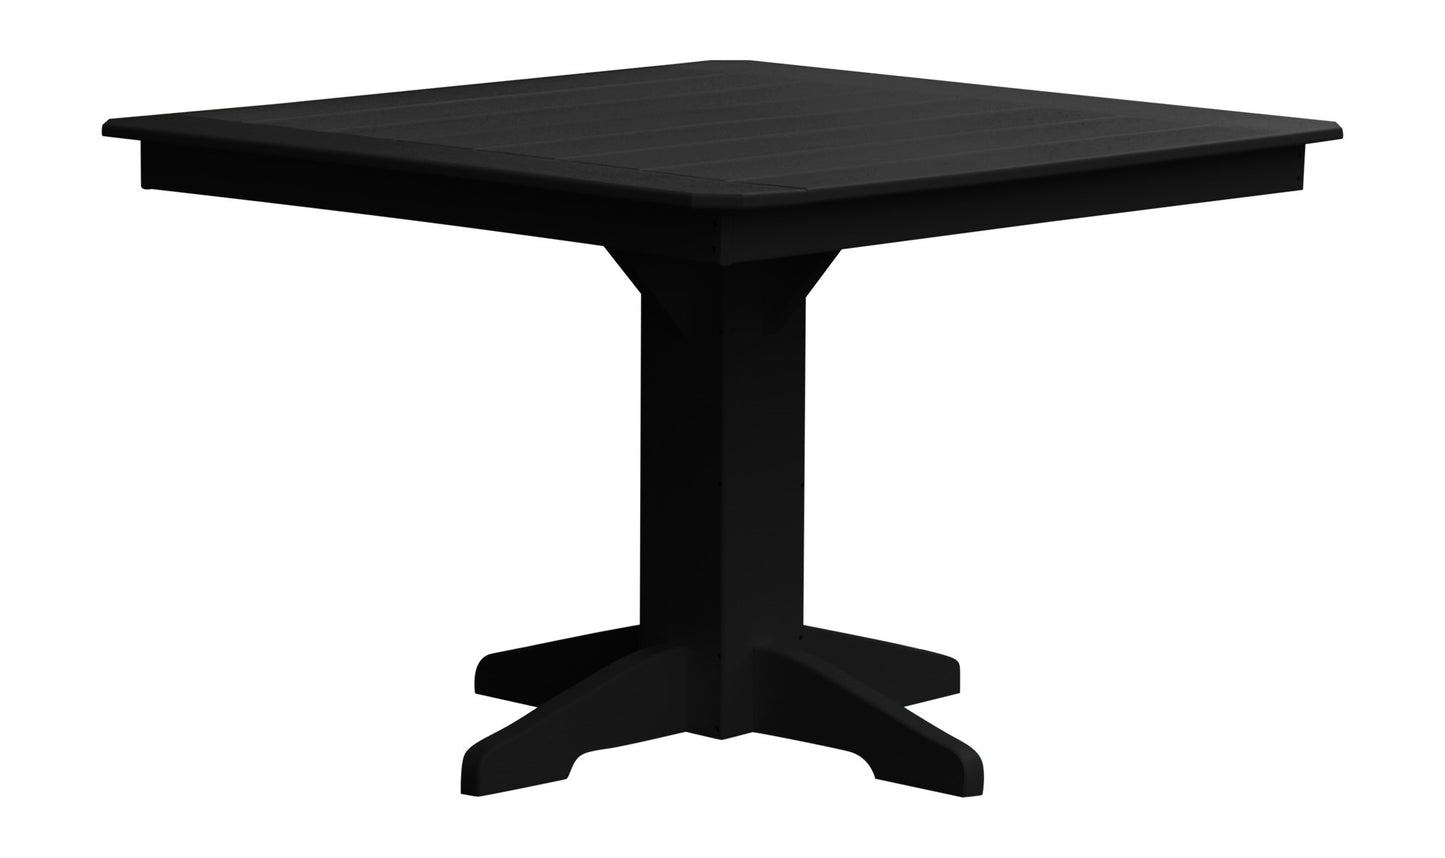 A&L Furniture Recycled Plastic 44" Square Dining Table - Black